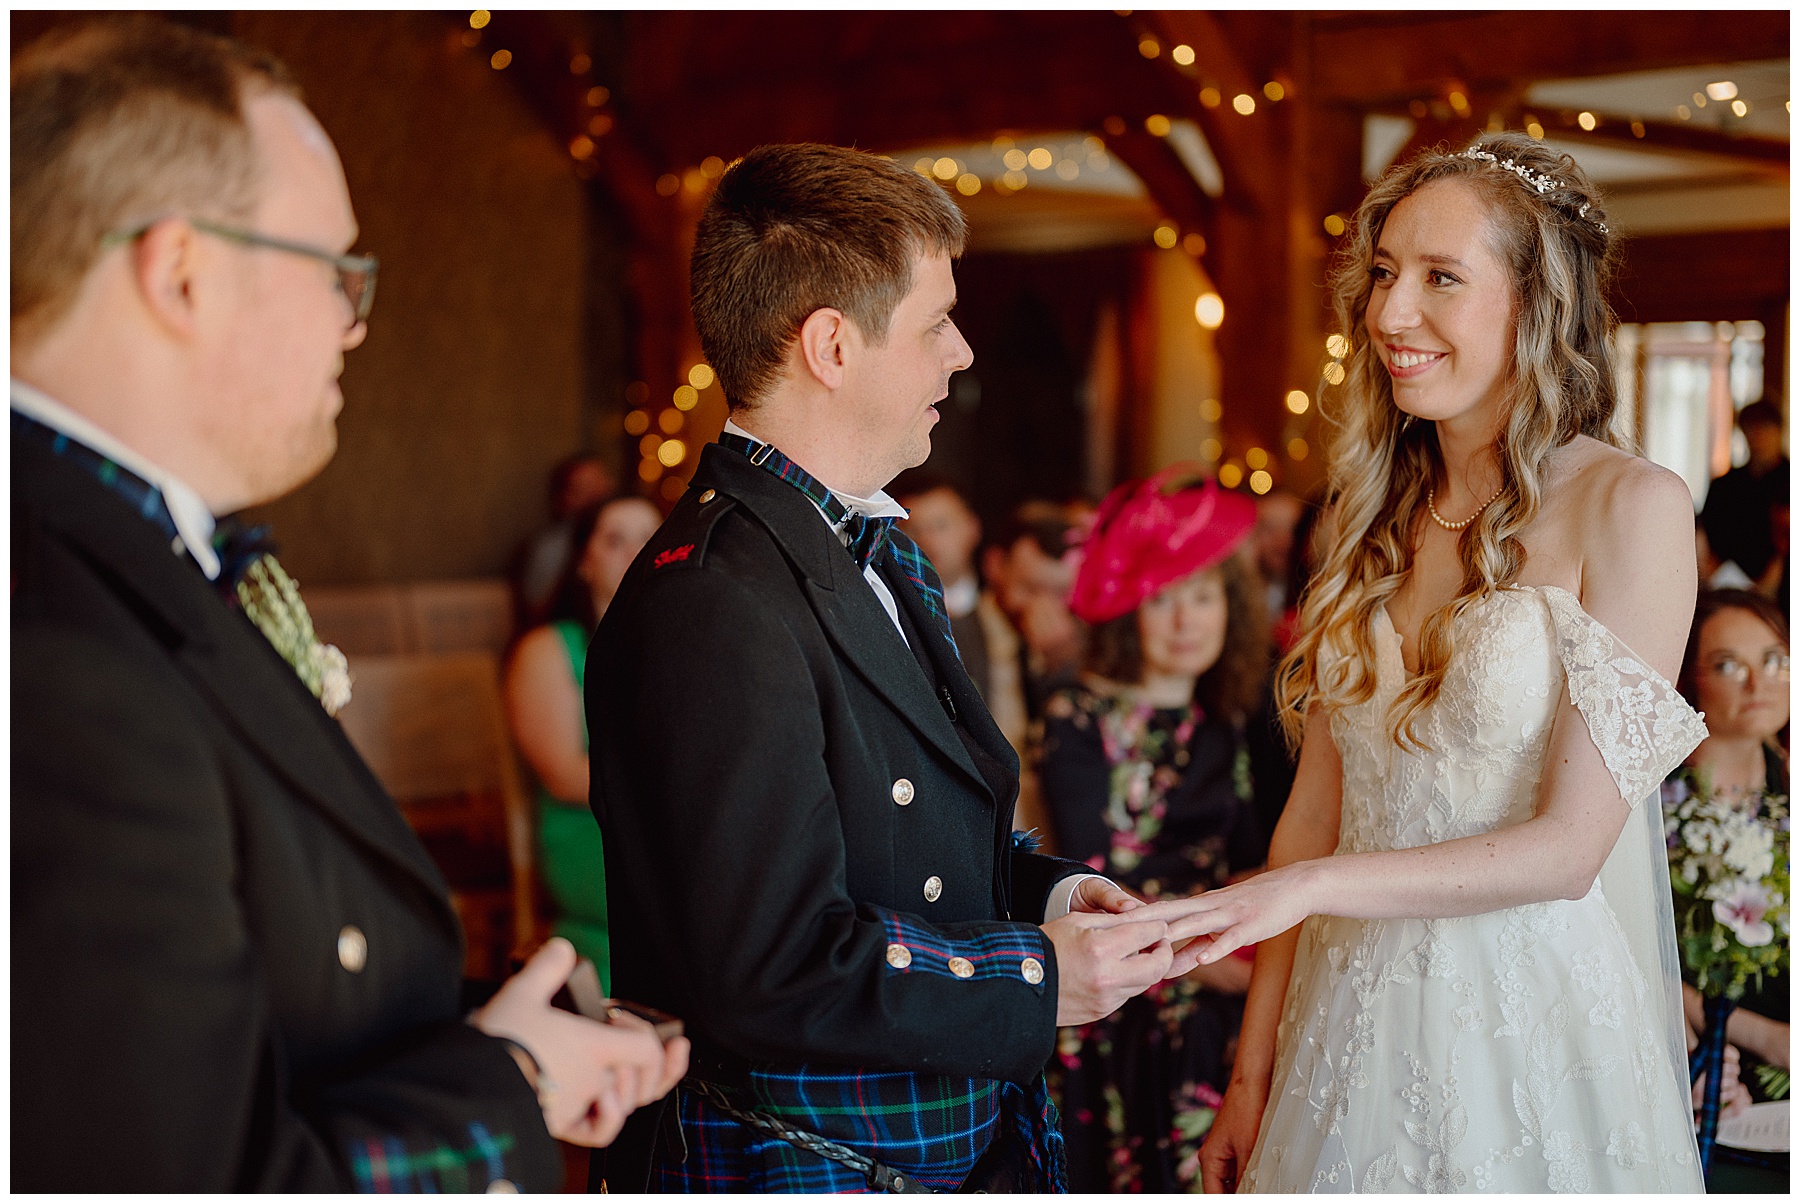 Exchanging Rings at King Arthur Wedding Ceremony